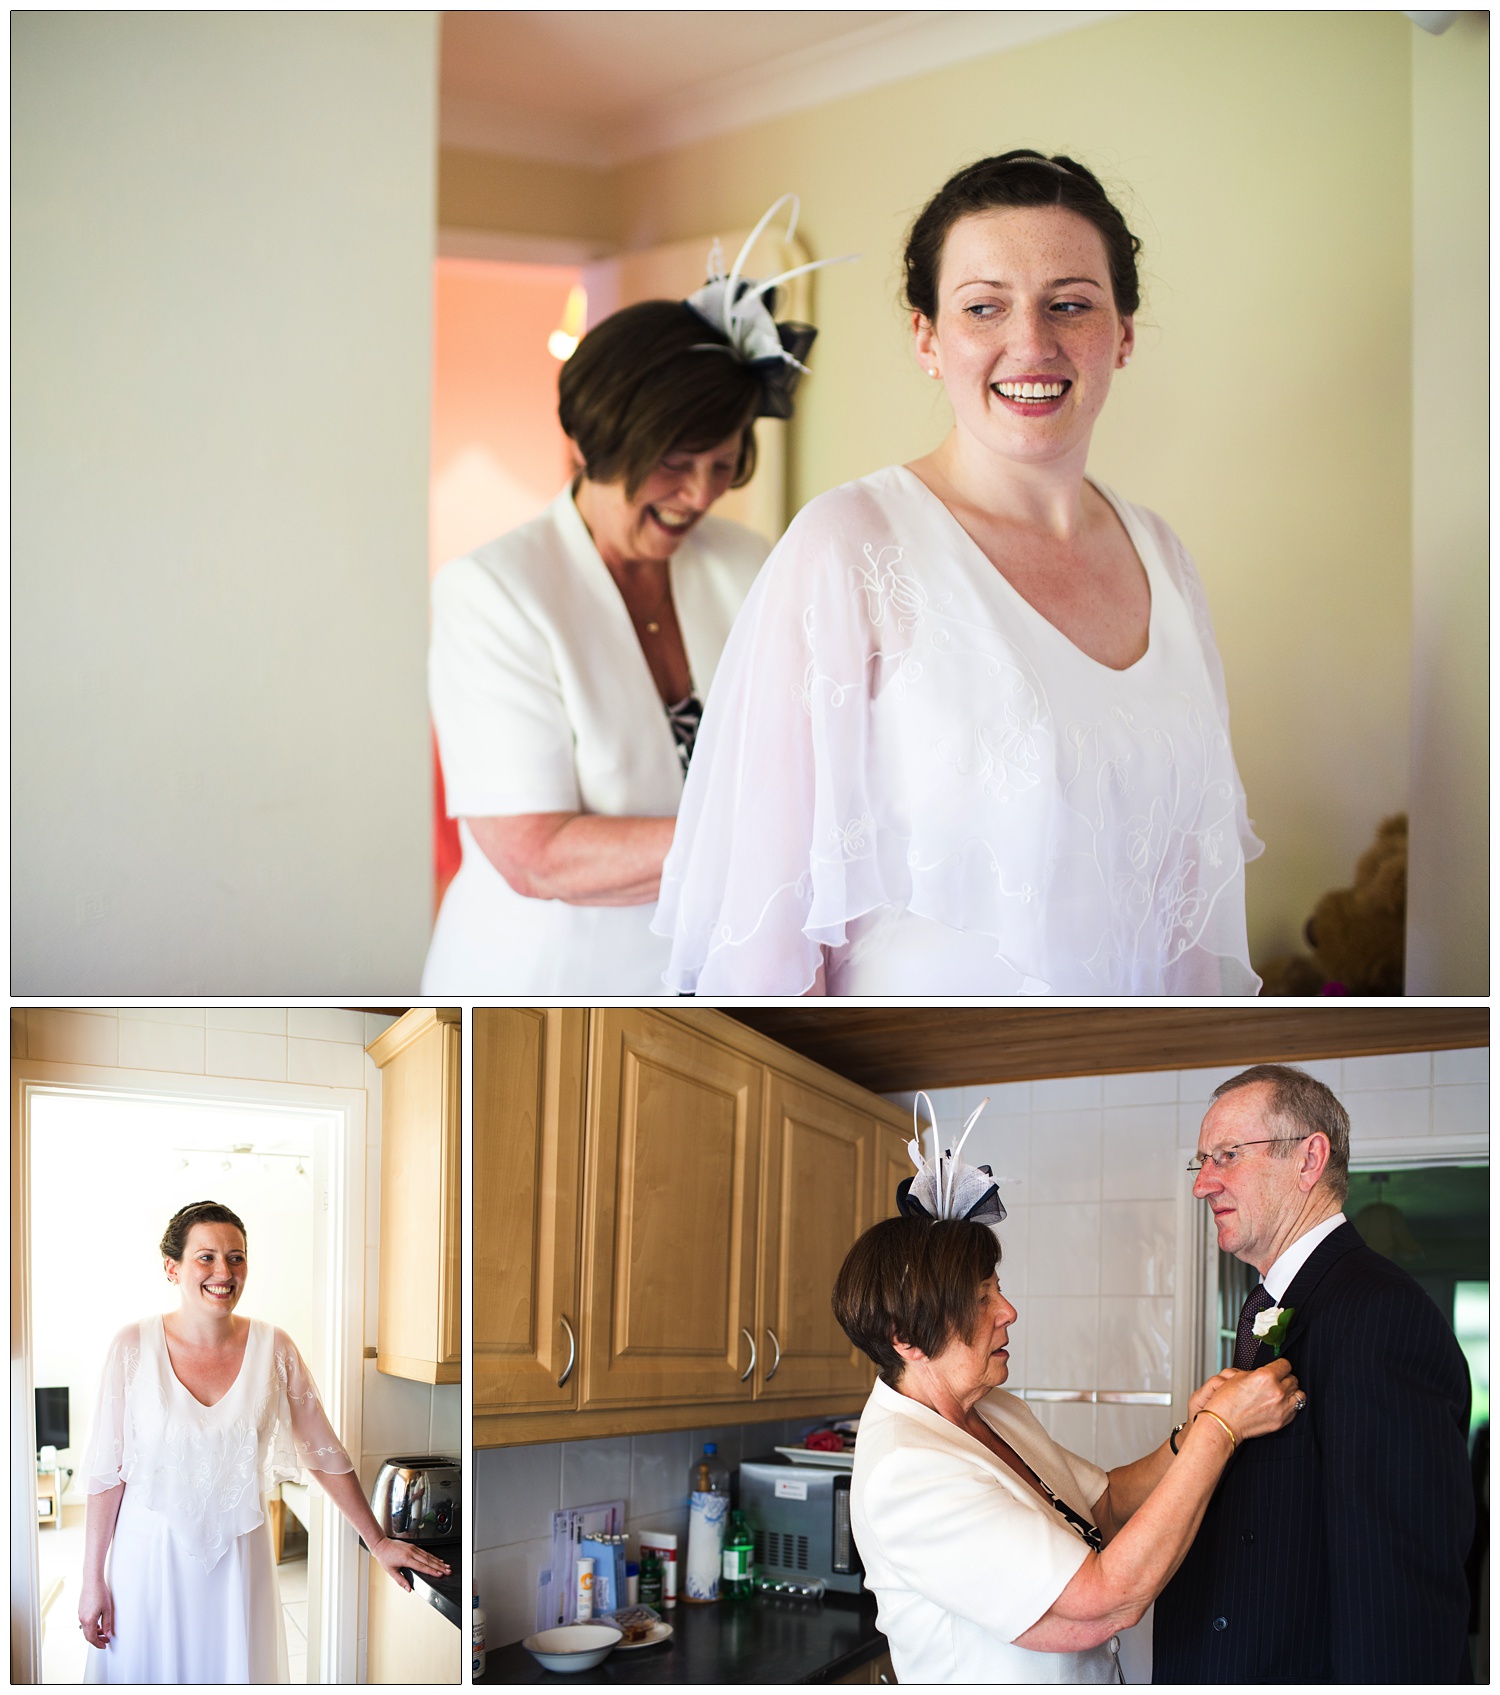 Mum helps her daughter in to a wedding dress. The one she wore for her own wedding.